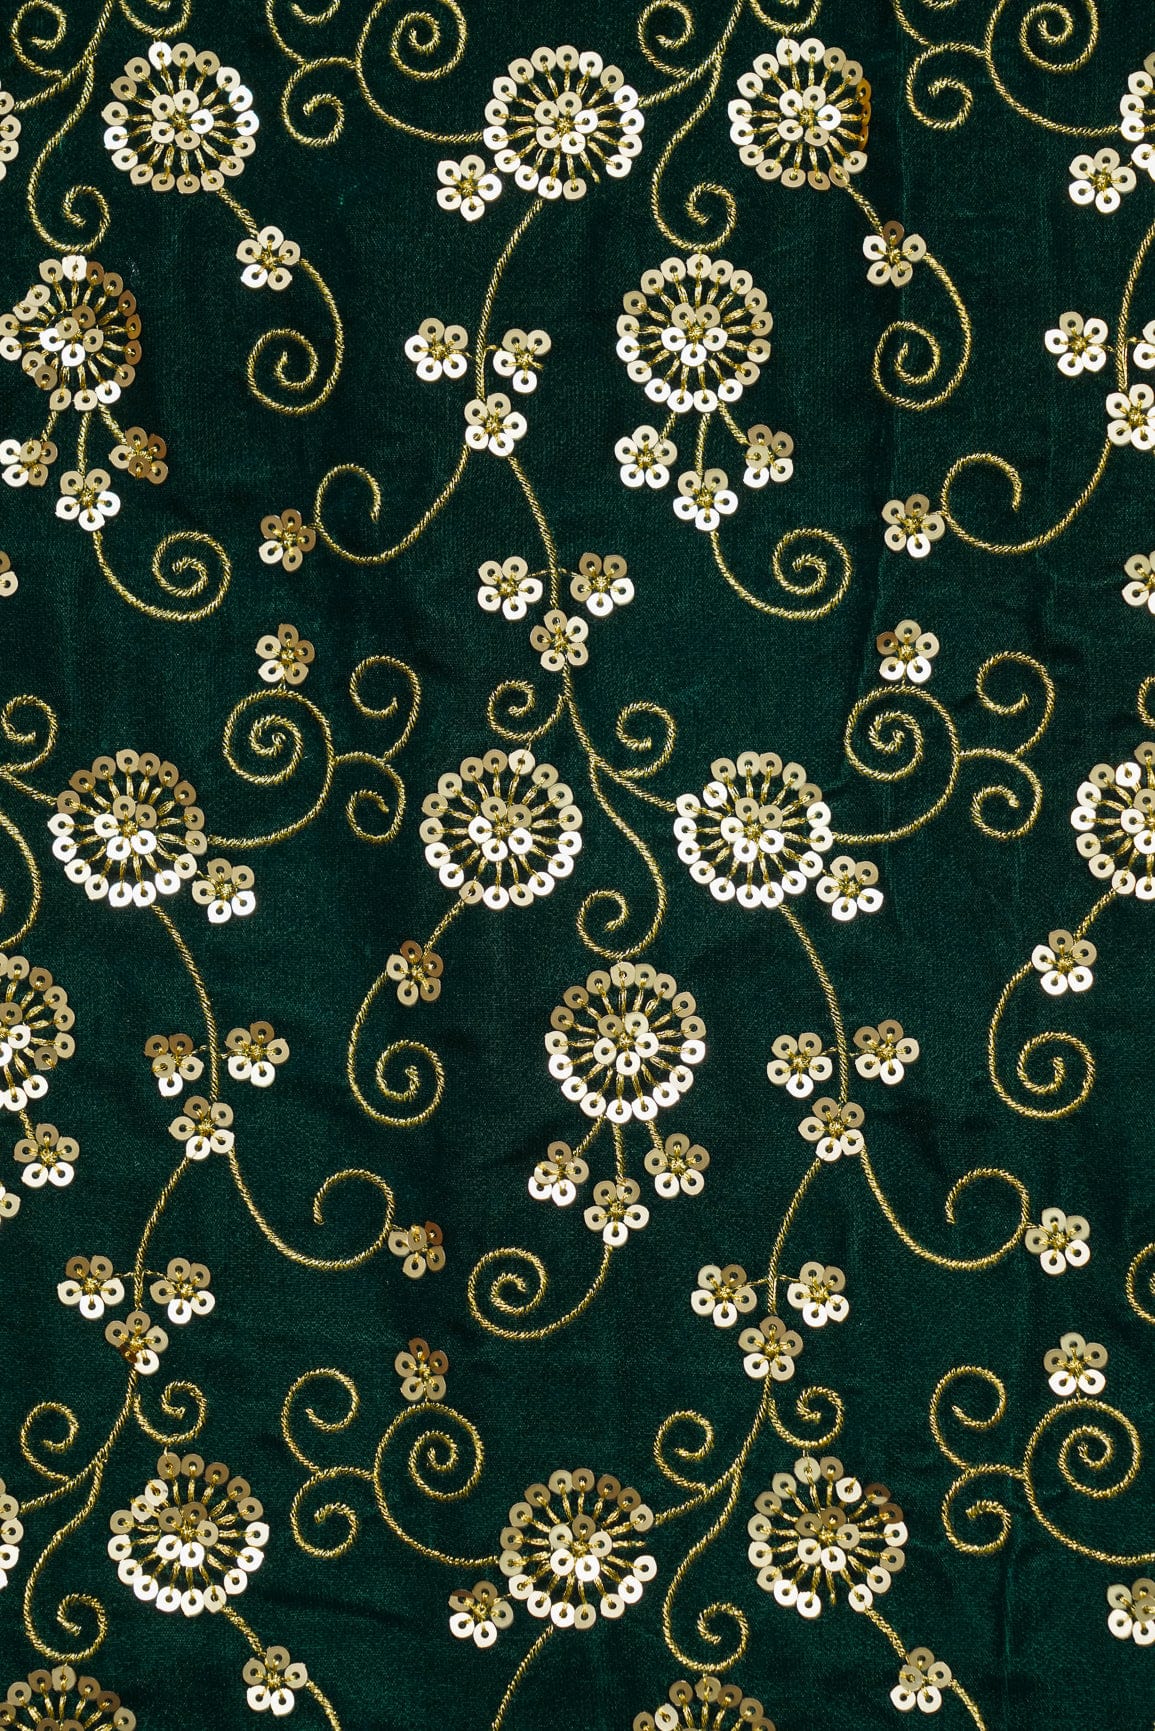 doeraa Embroidery Fabrics Gold Sequins With Gold Thread Embroidery On Bottle Green Velvet